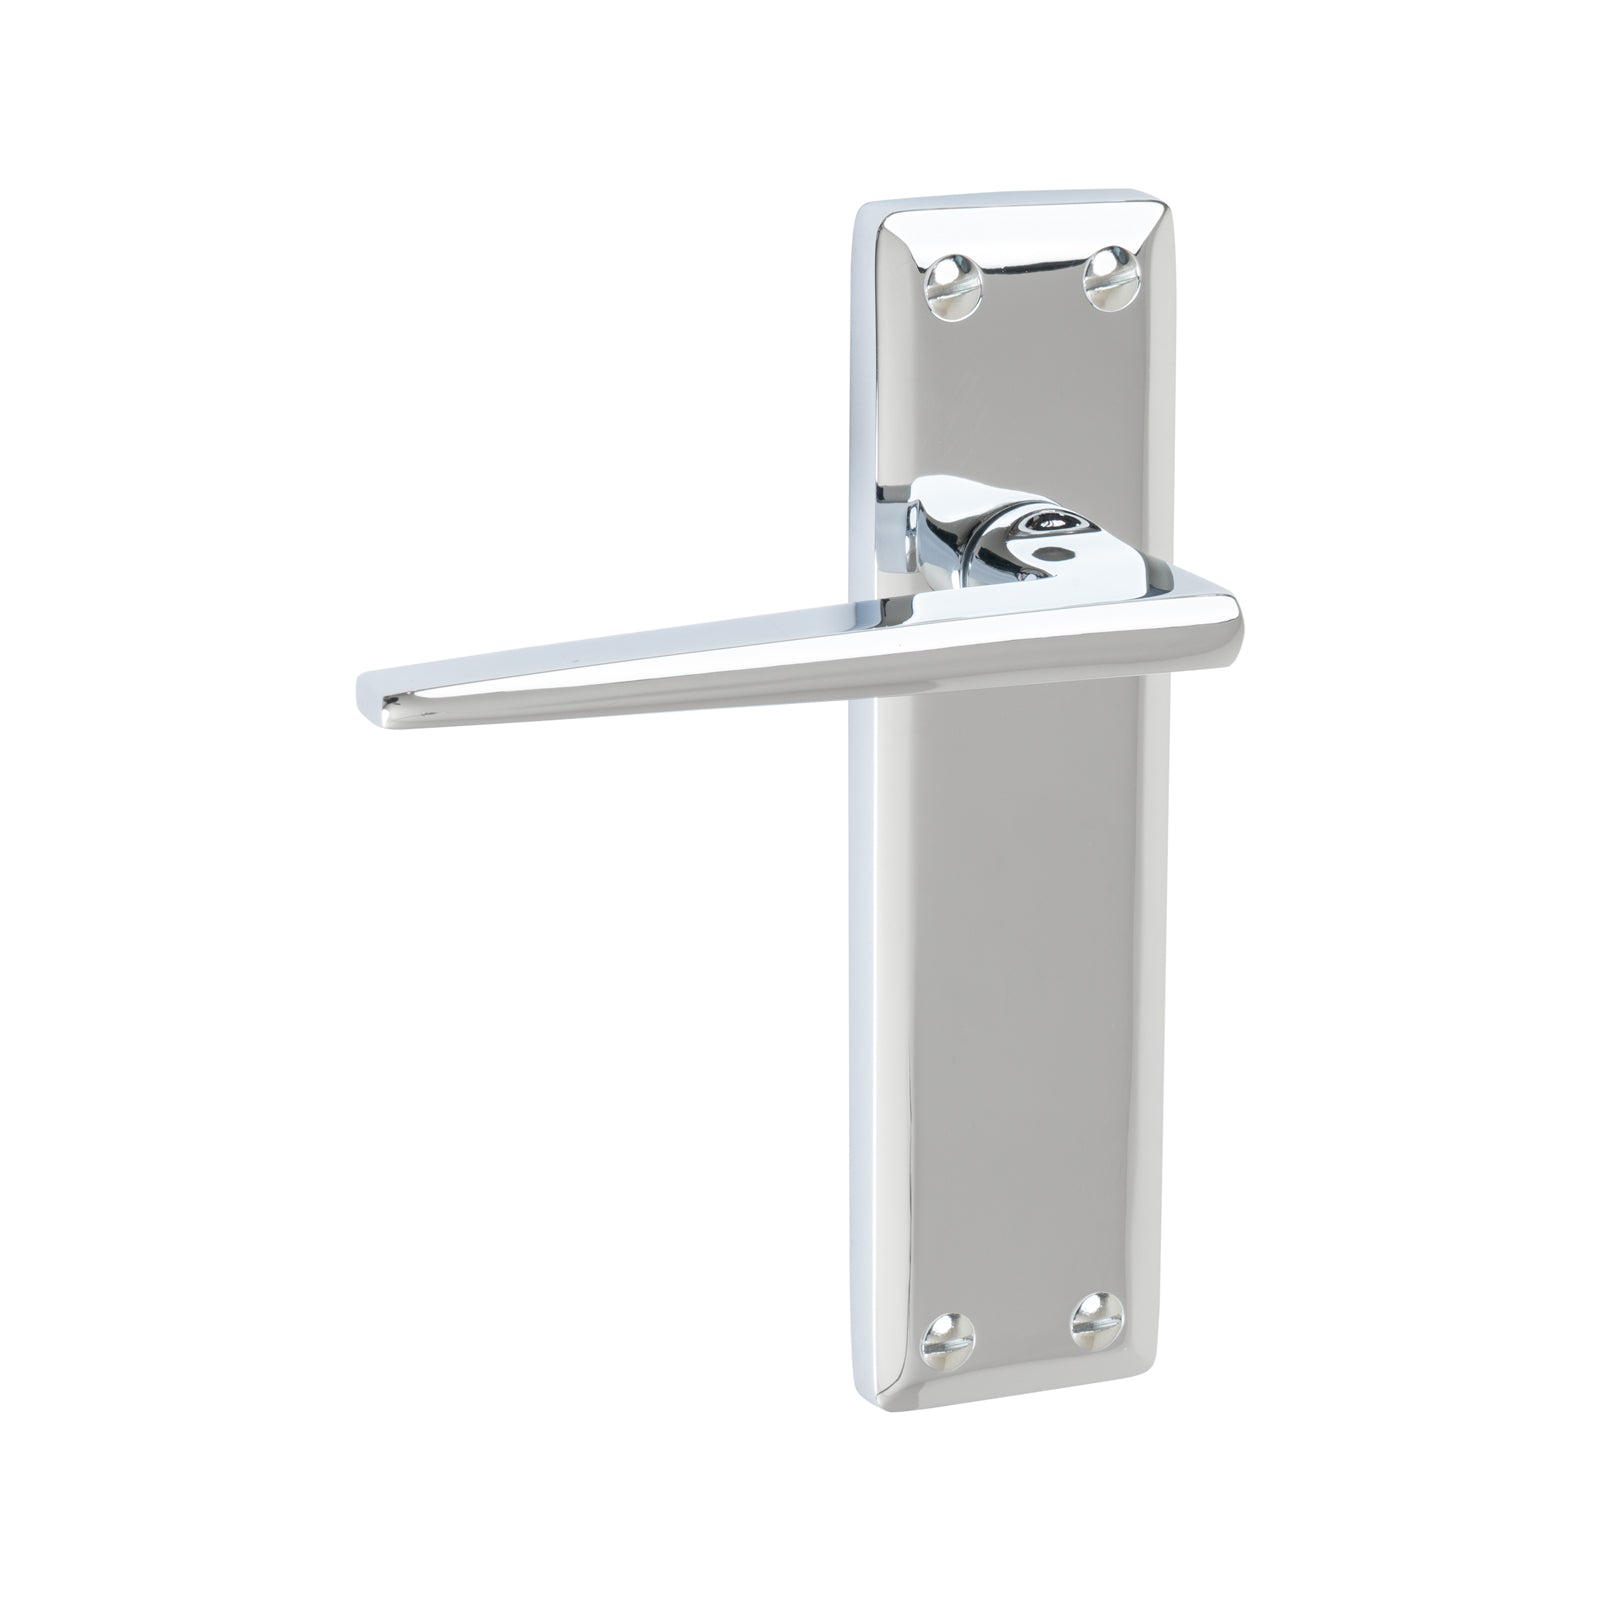 Kendal Door Handles On Plate Latch Handle in Polished Chrome SHOW